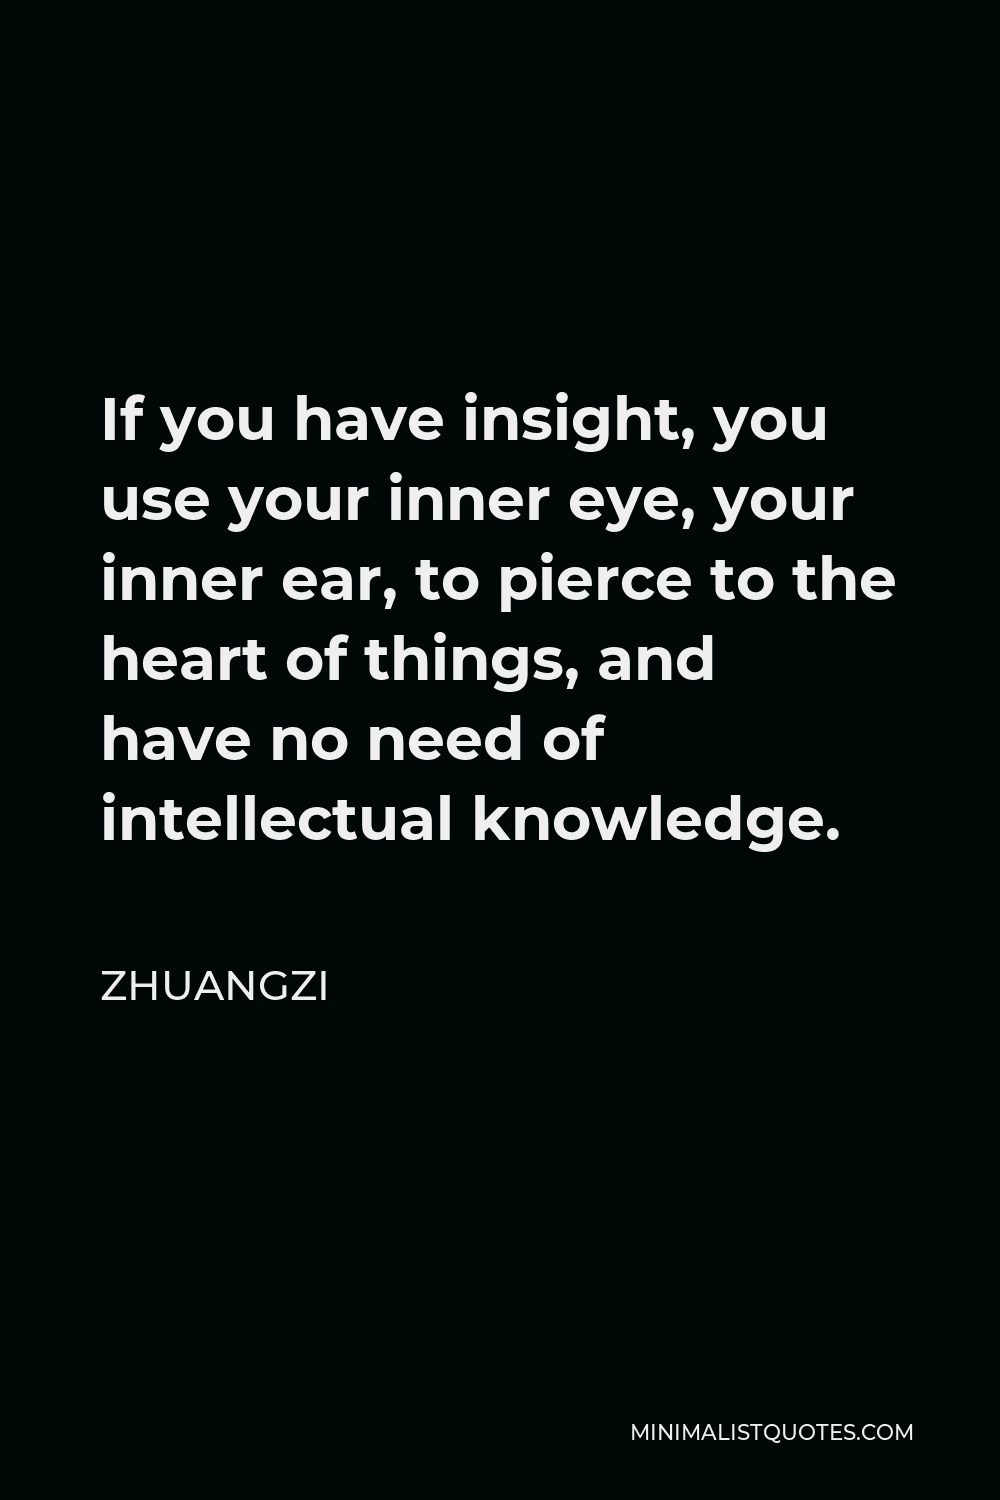 Zhuangzi Quote - If you have insight, you use your inner eye, your inner ear, to pierce to the heart of things, and have no need of intellectual knowledge.